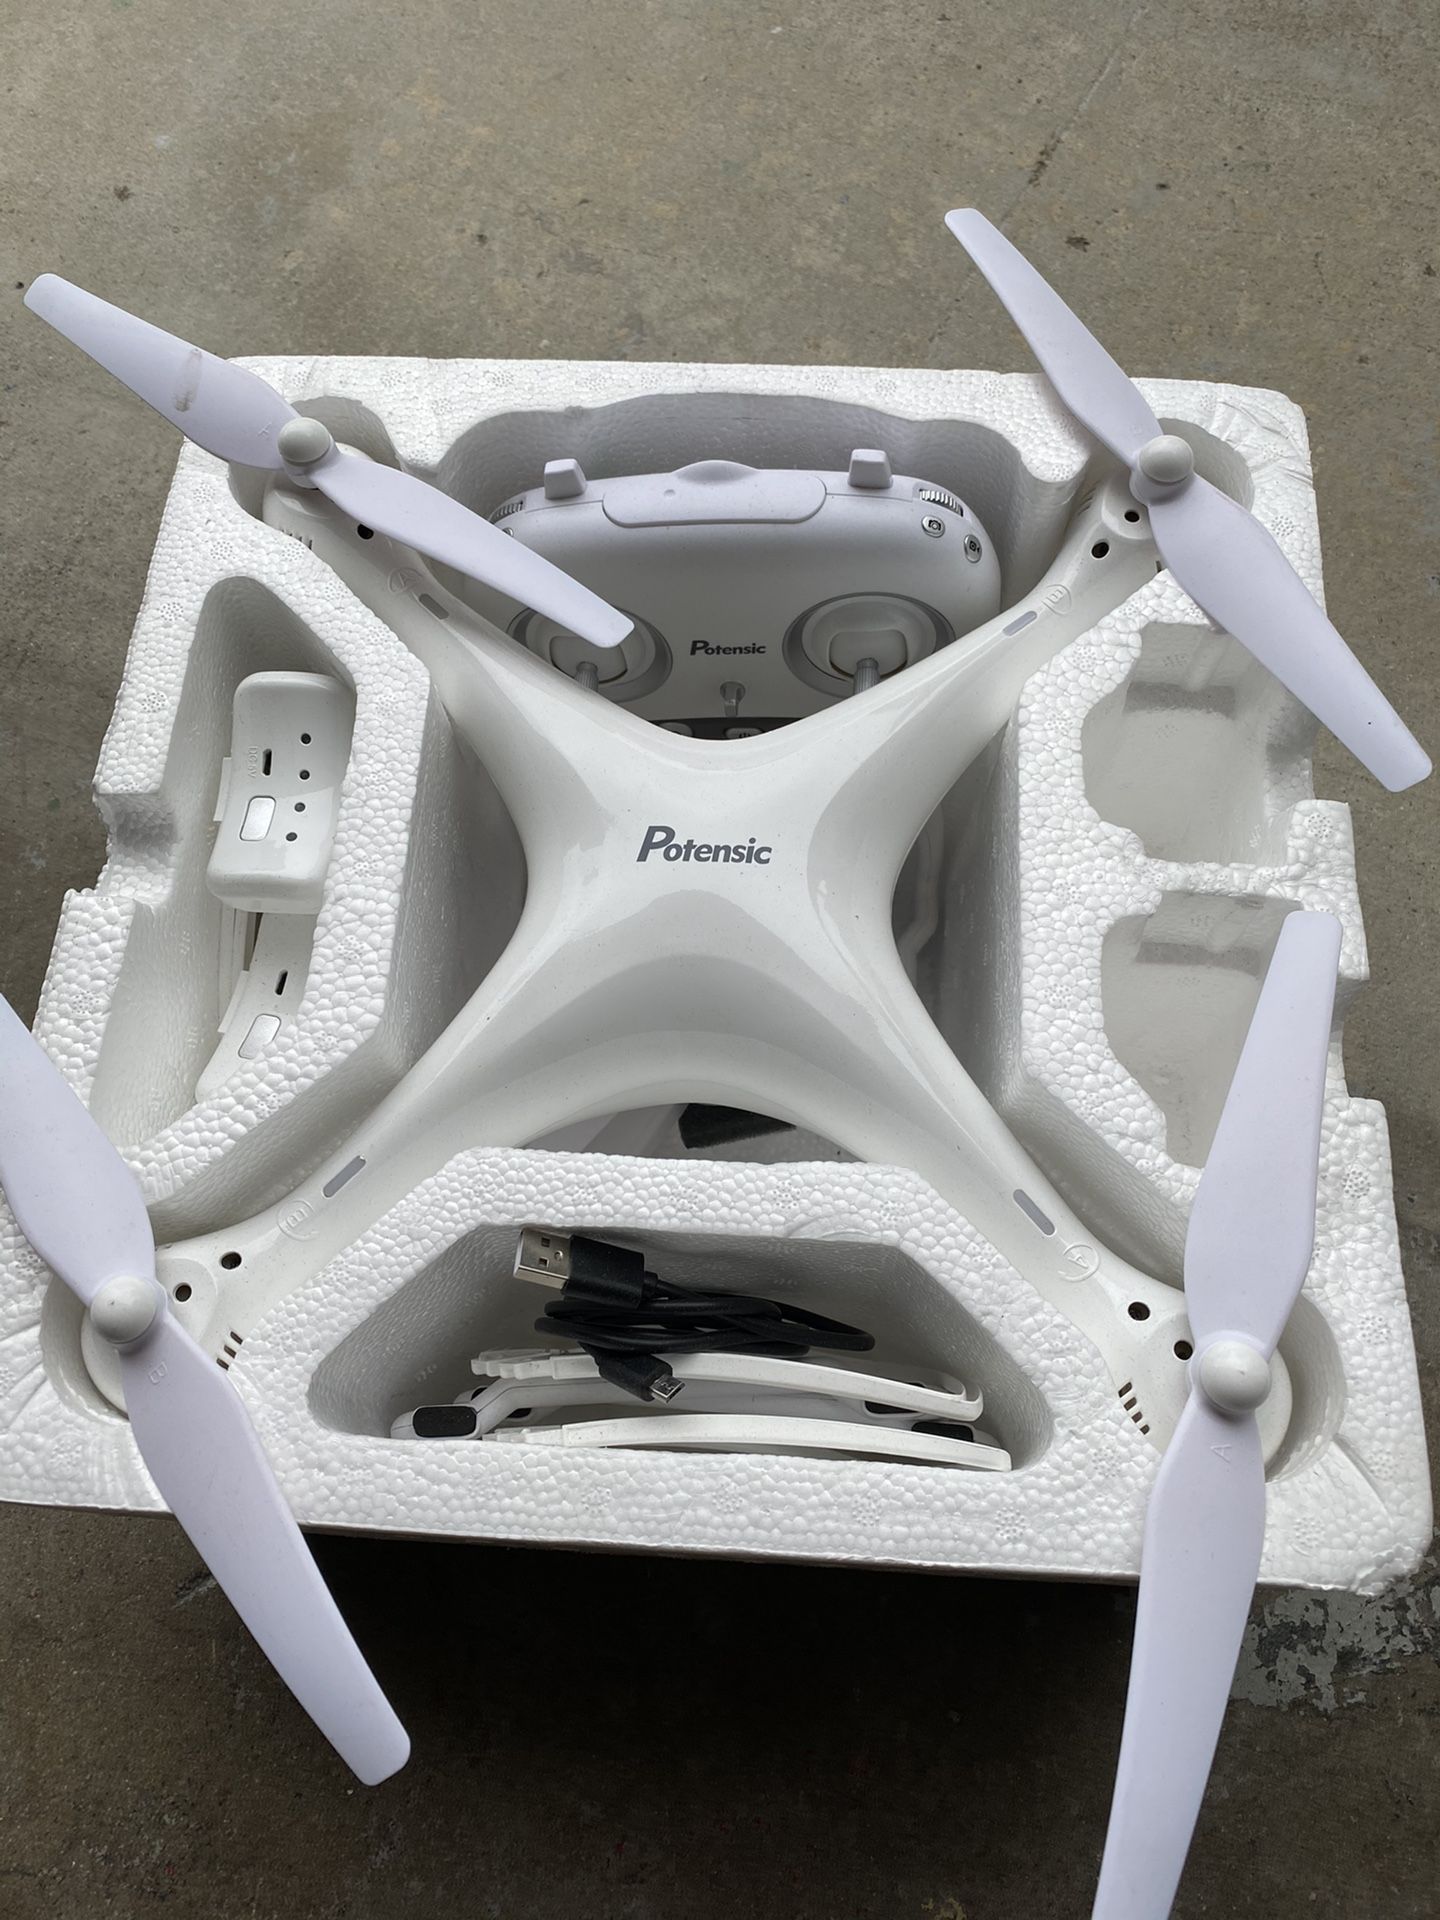 Potensic- T35 drone